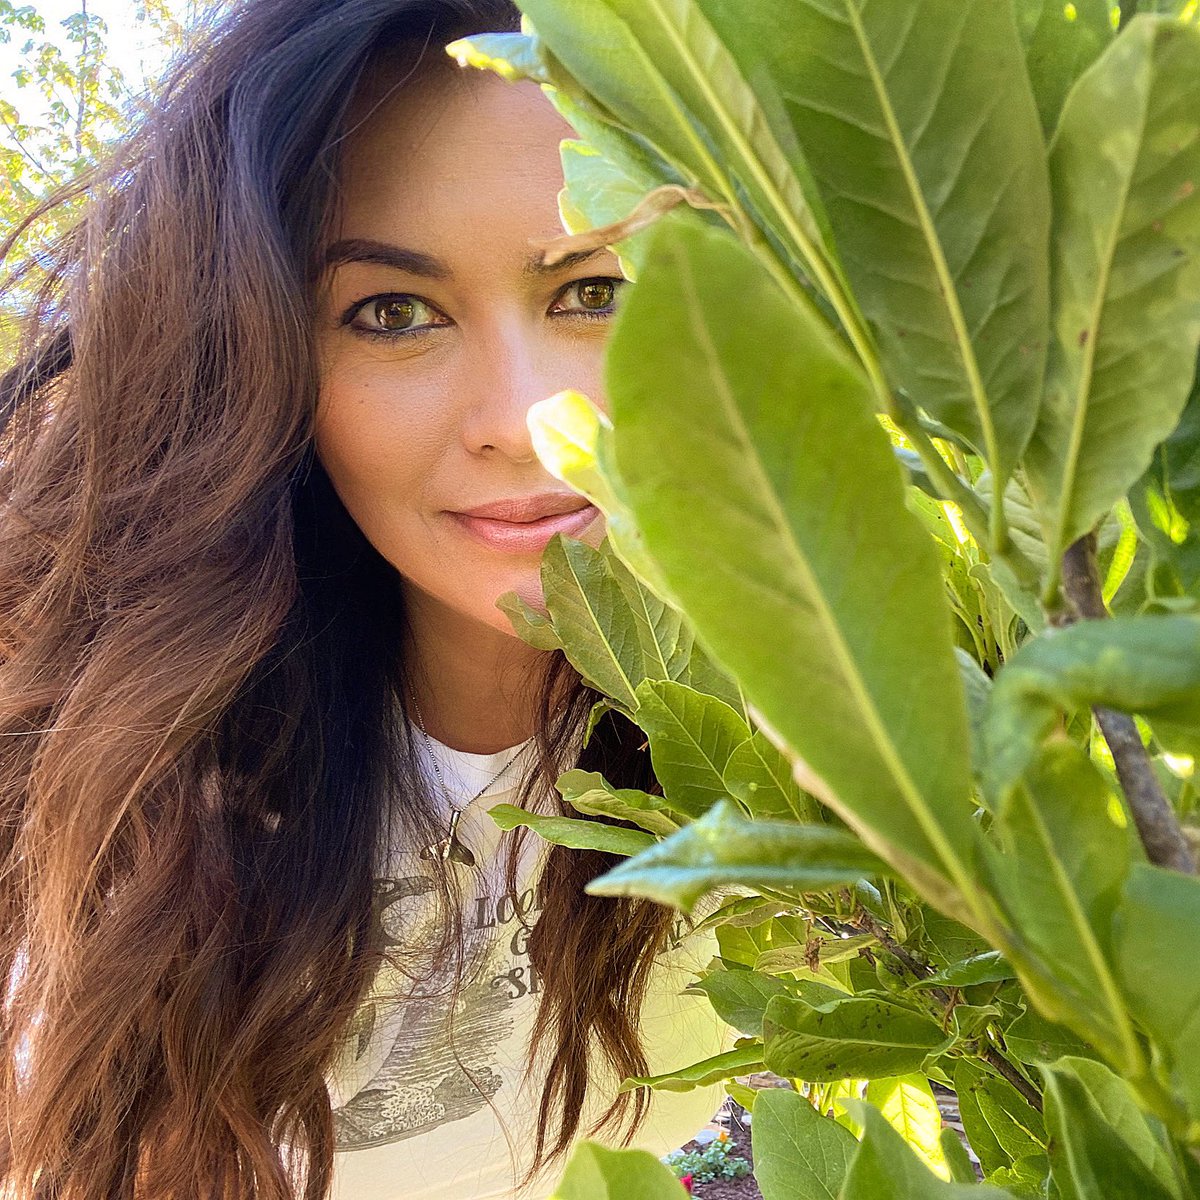 Happy Earth Day (or as my friend  @ecoshaker would say Happy F*cking Earth Day!)  I did my hair & make up today (very rare for me during these pandemic days) for some zoom meetings (who else misses phone calls?) but now that they are all over, I’m back in our garden listening 1/